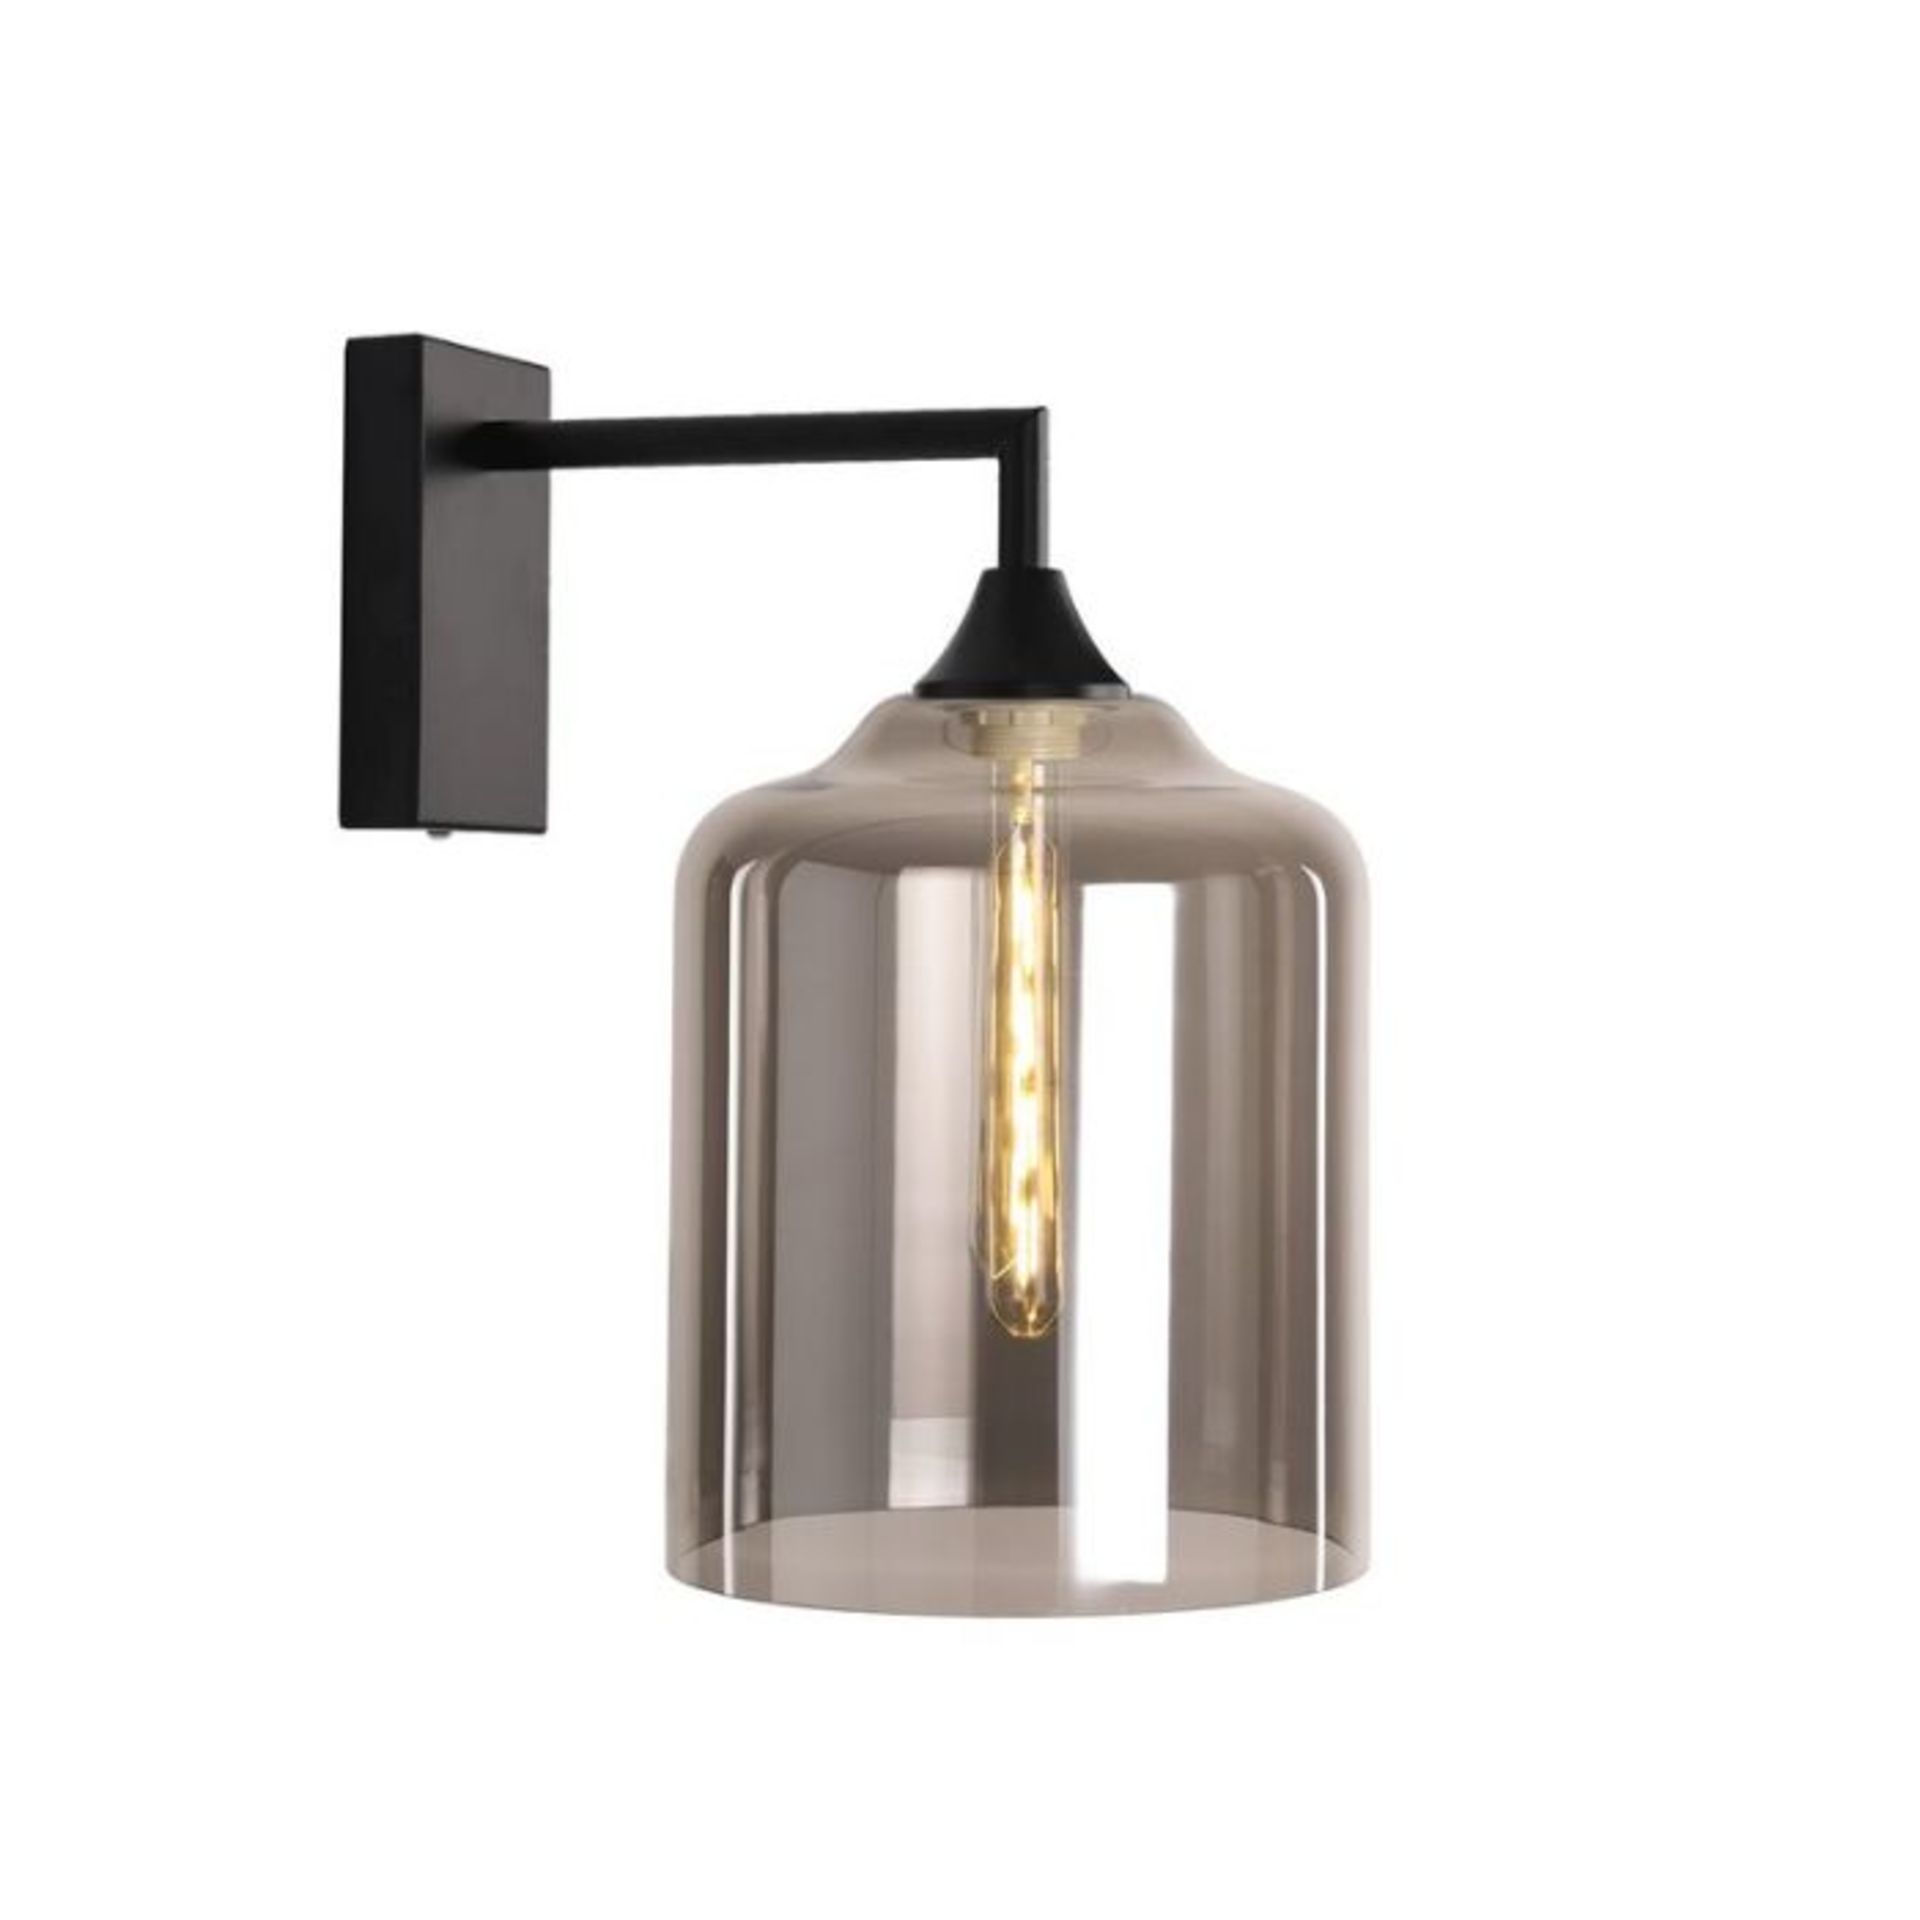 George Oliver,Borica 1-Light Sconce ( ) RRP -£104.99 (27326/10 -GAGS1005)(SILVER/ GREY)